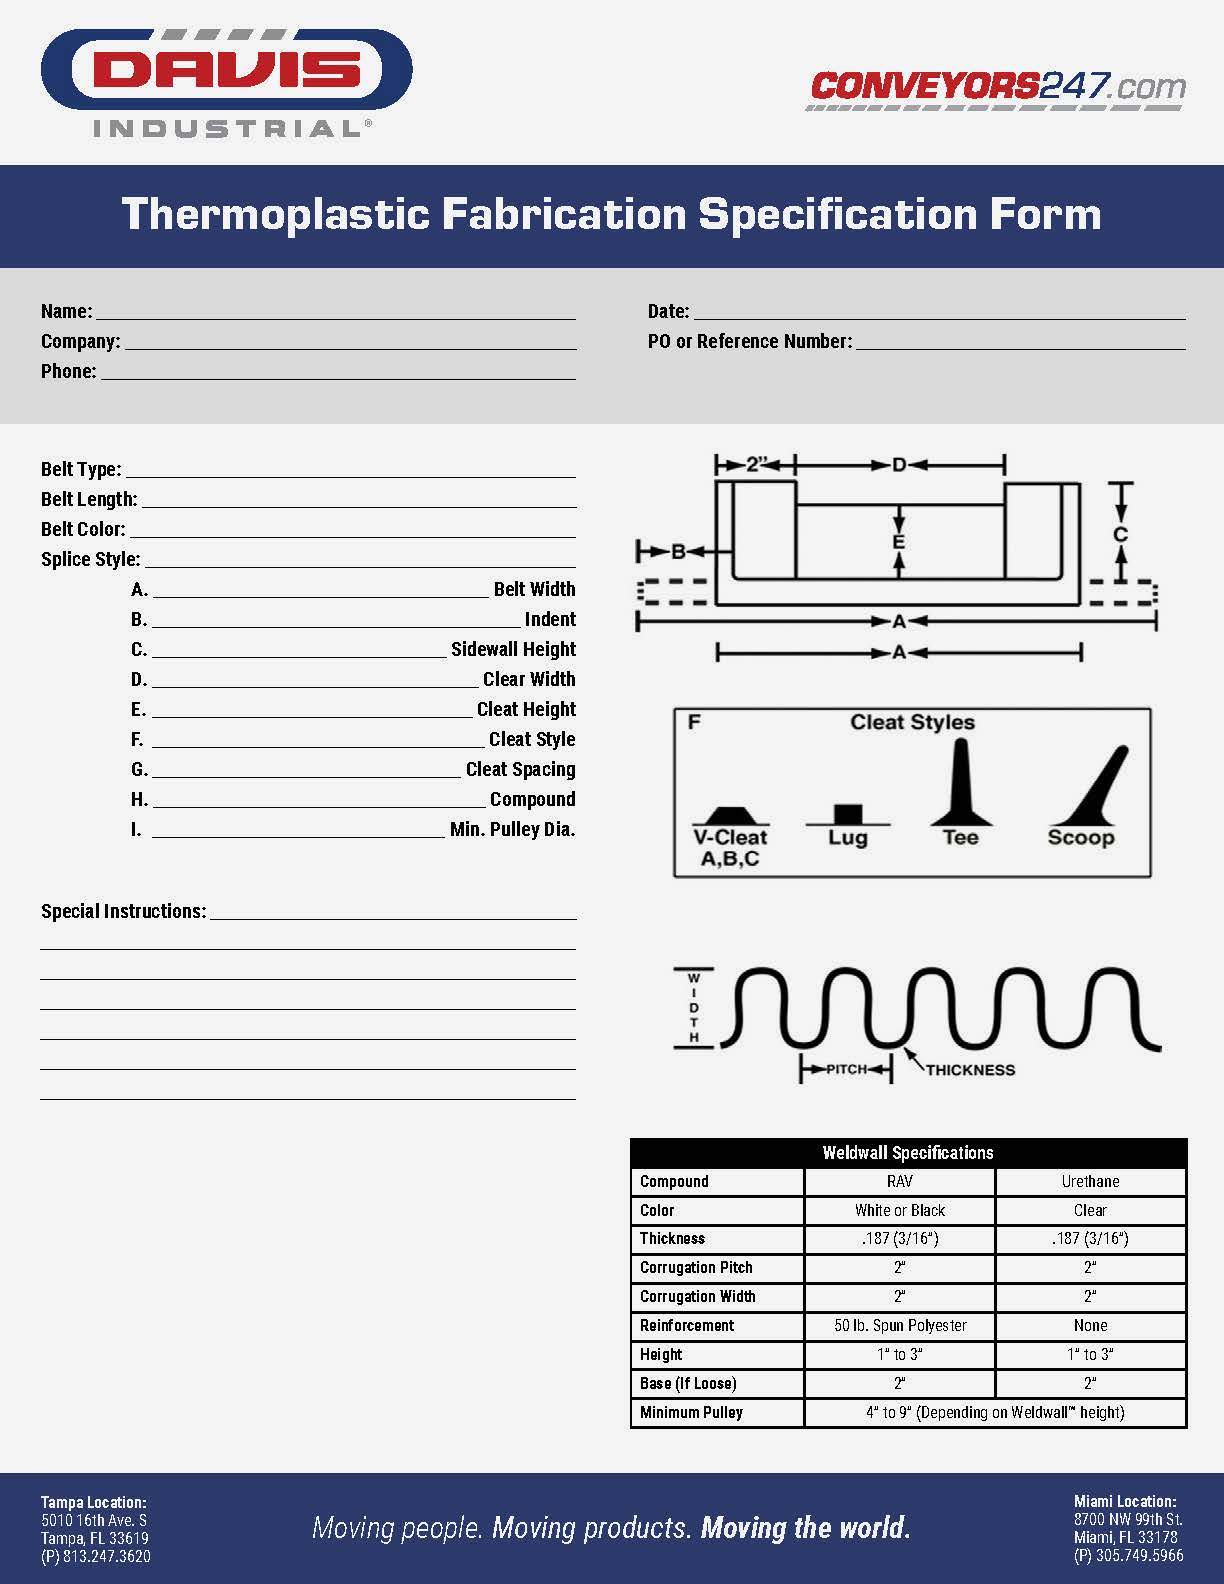 Davis_Thermoplastic Fabrication Specification_Form